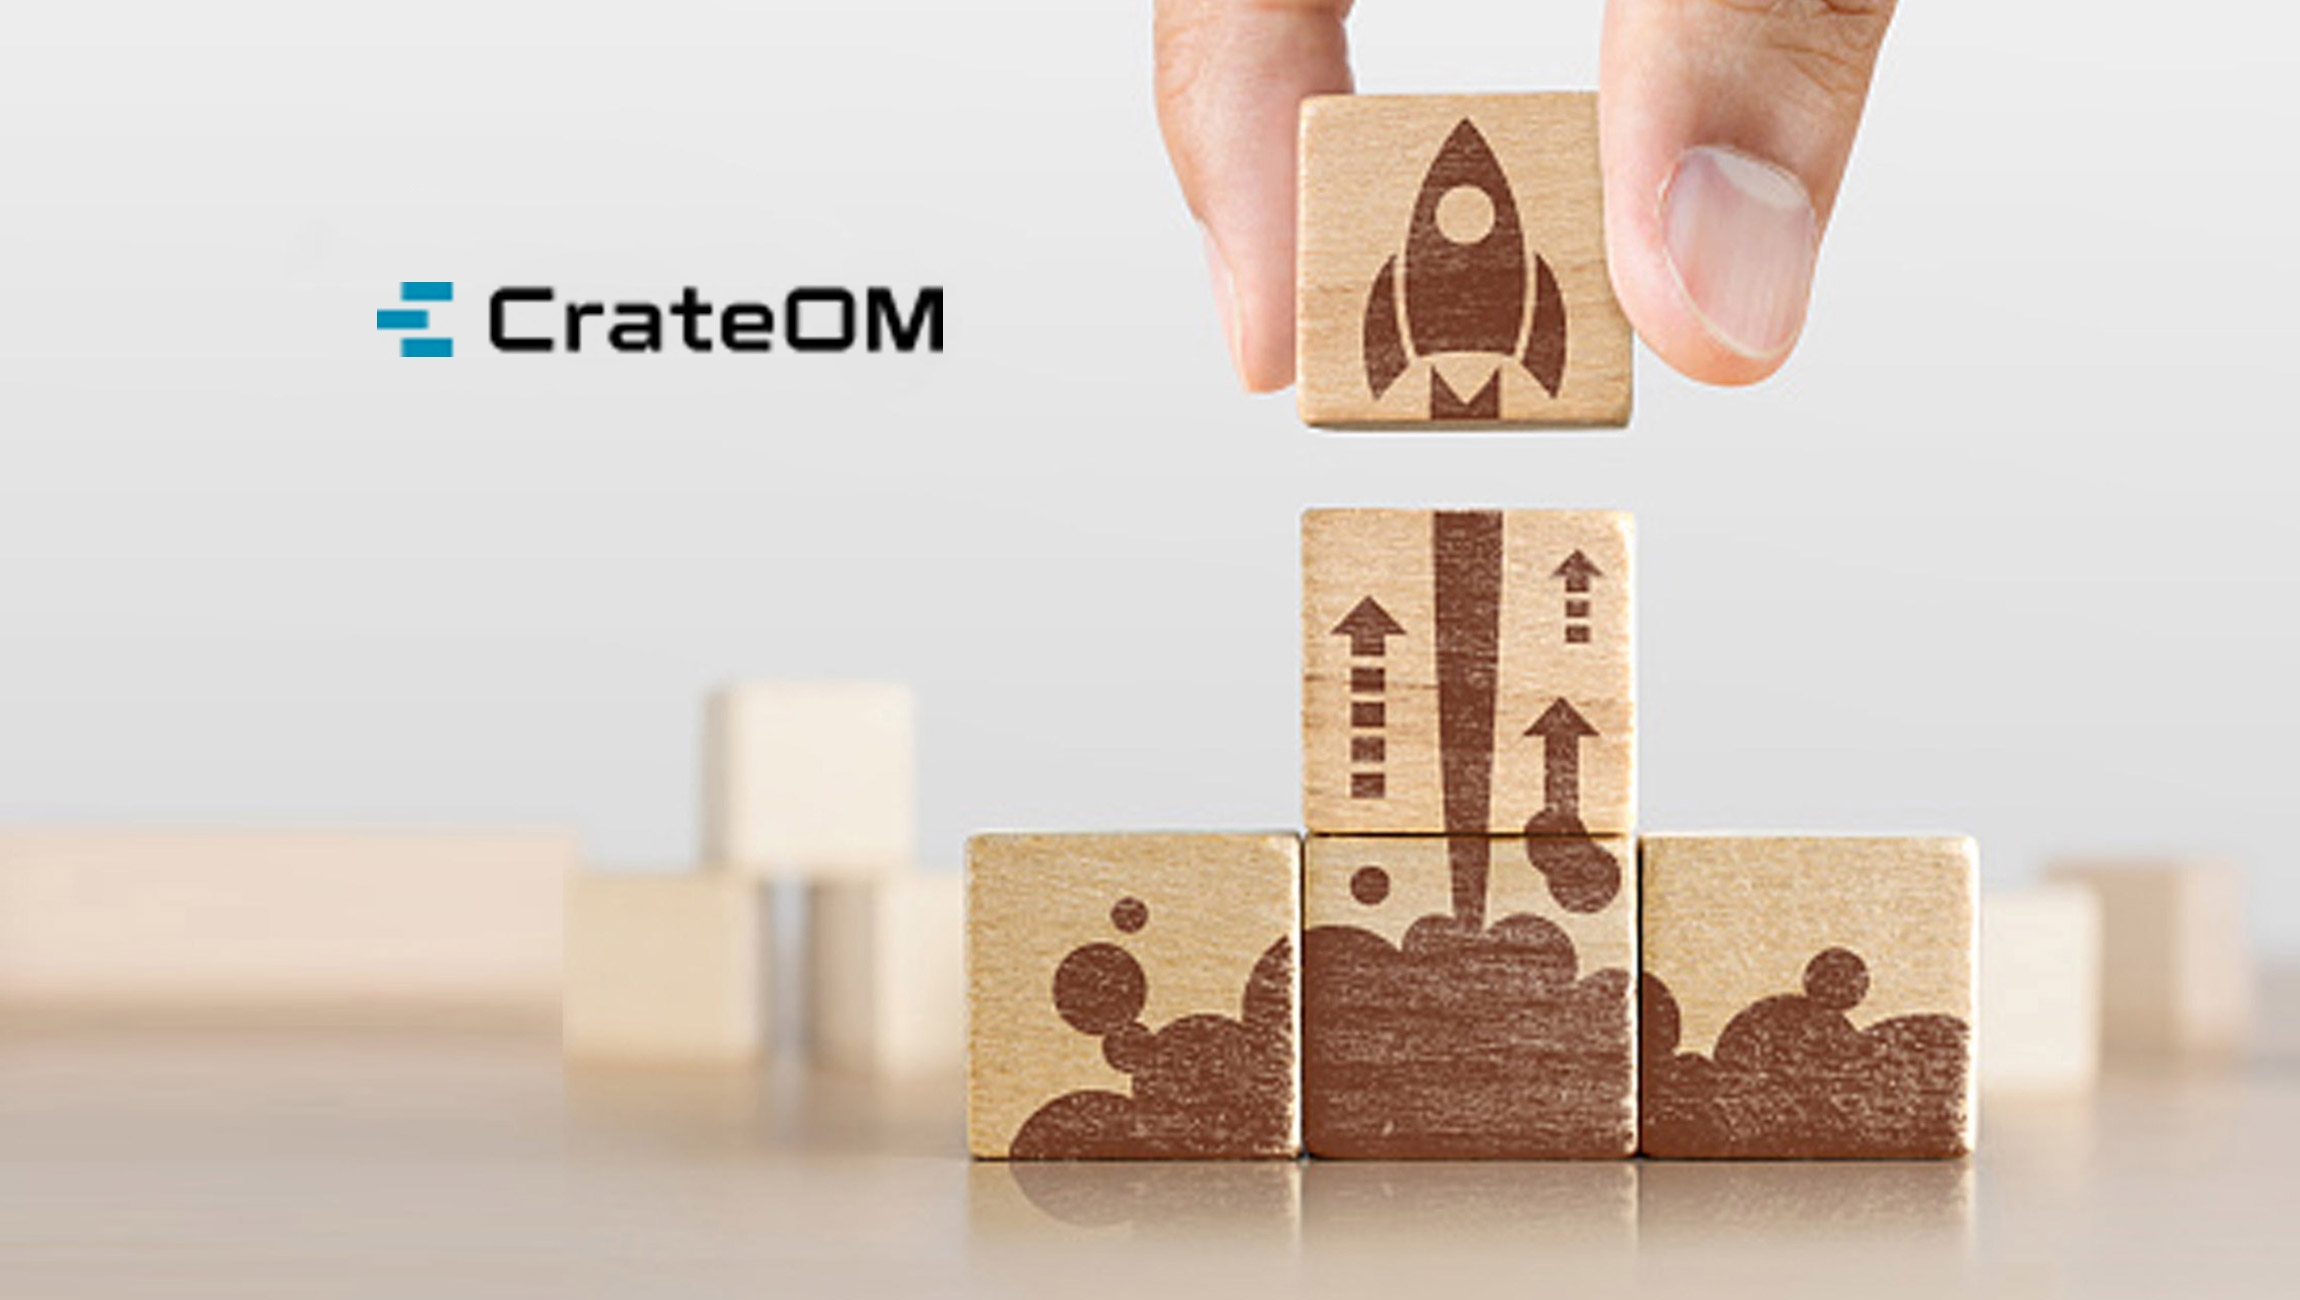 Crate.io-Launches-CrateOM--a-Smart-Solution-Digitalizing-and-Optimizing-Operational-Processes